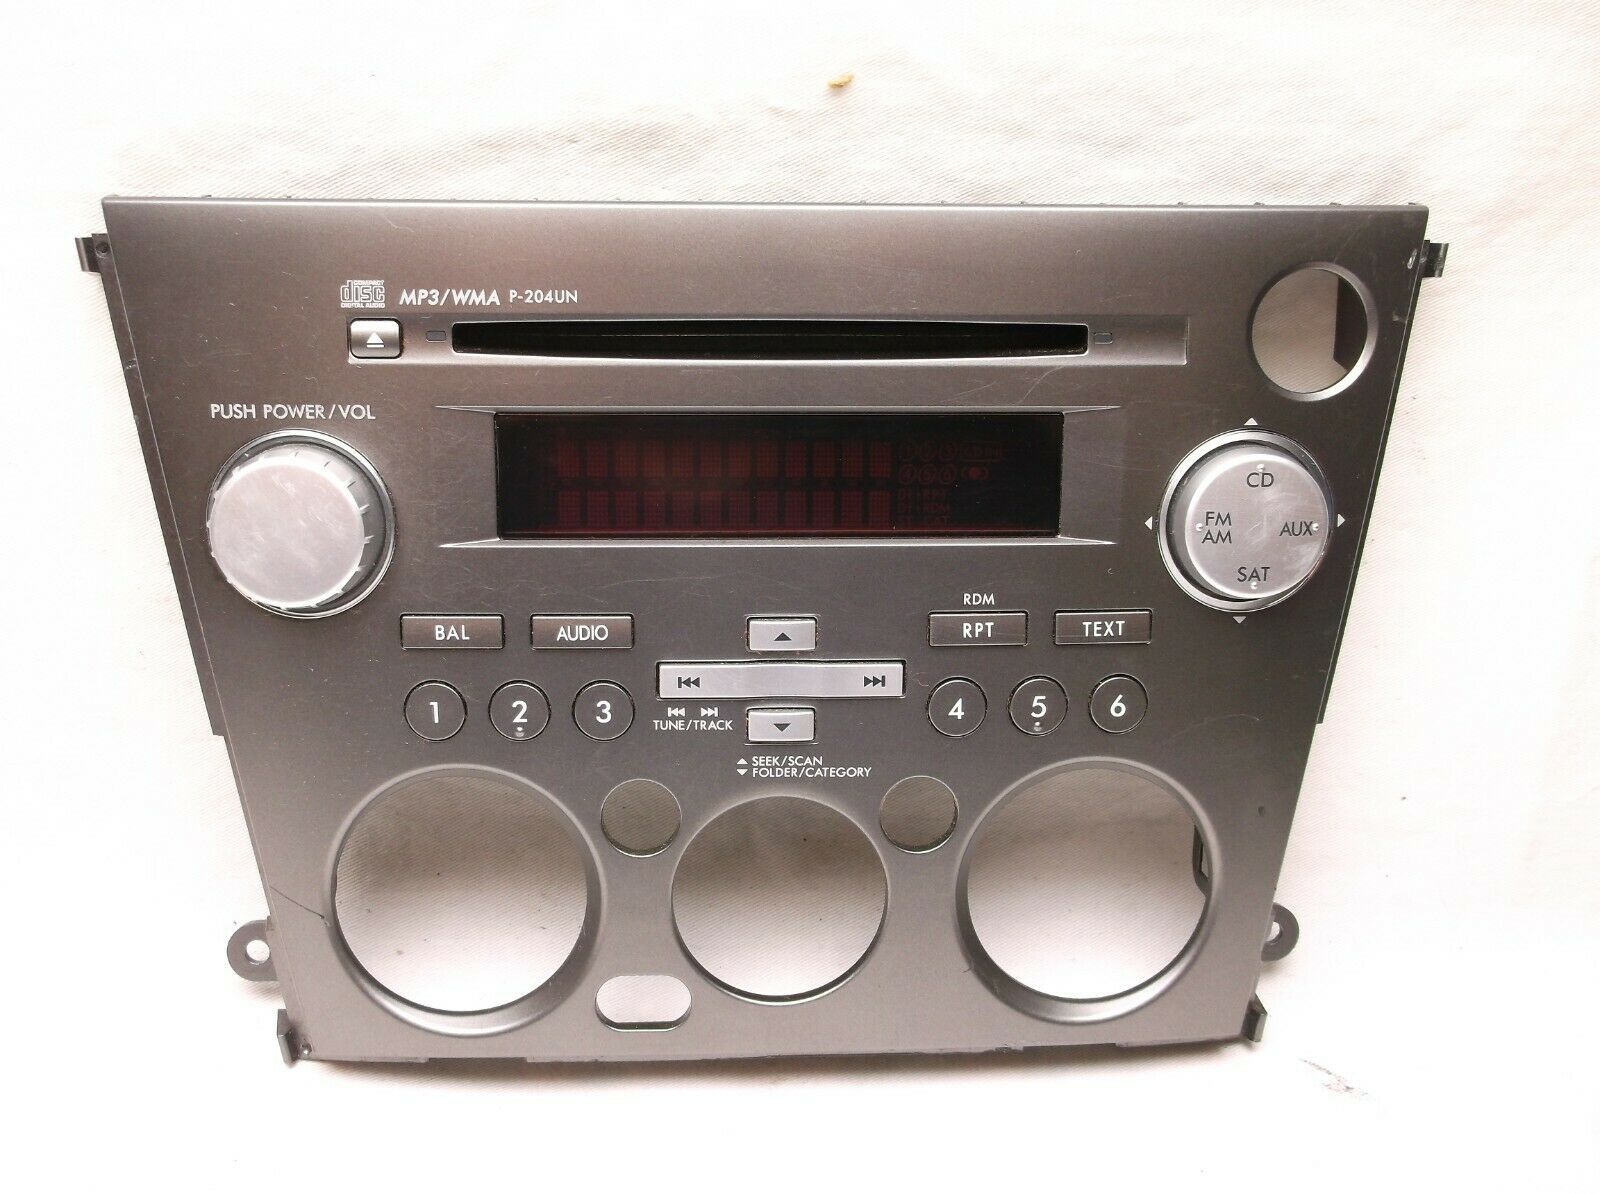 07-09 SUBARU LEGACY  AM-FM-CD/RECEIVER/MP3/WMA/FACE PLATE/PANEL ONLY - $20.00